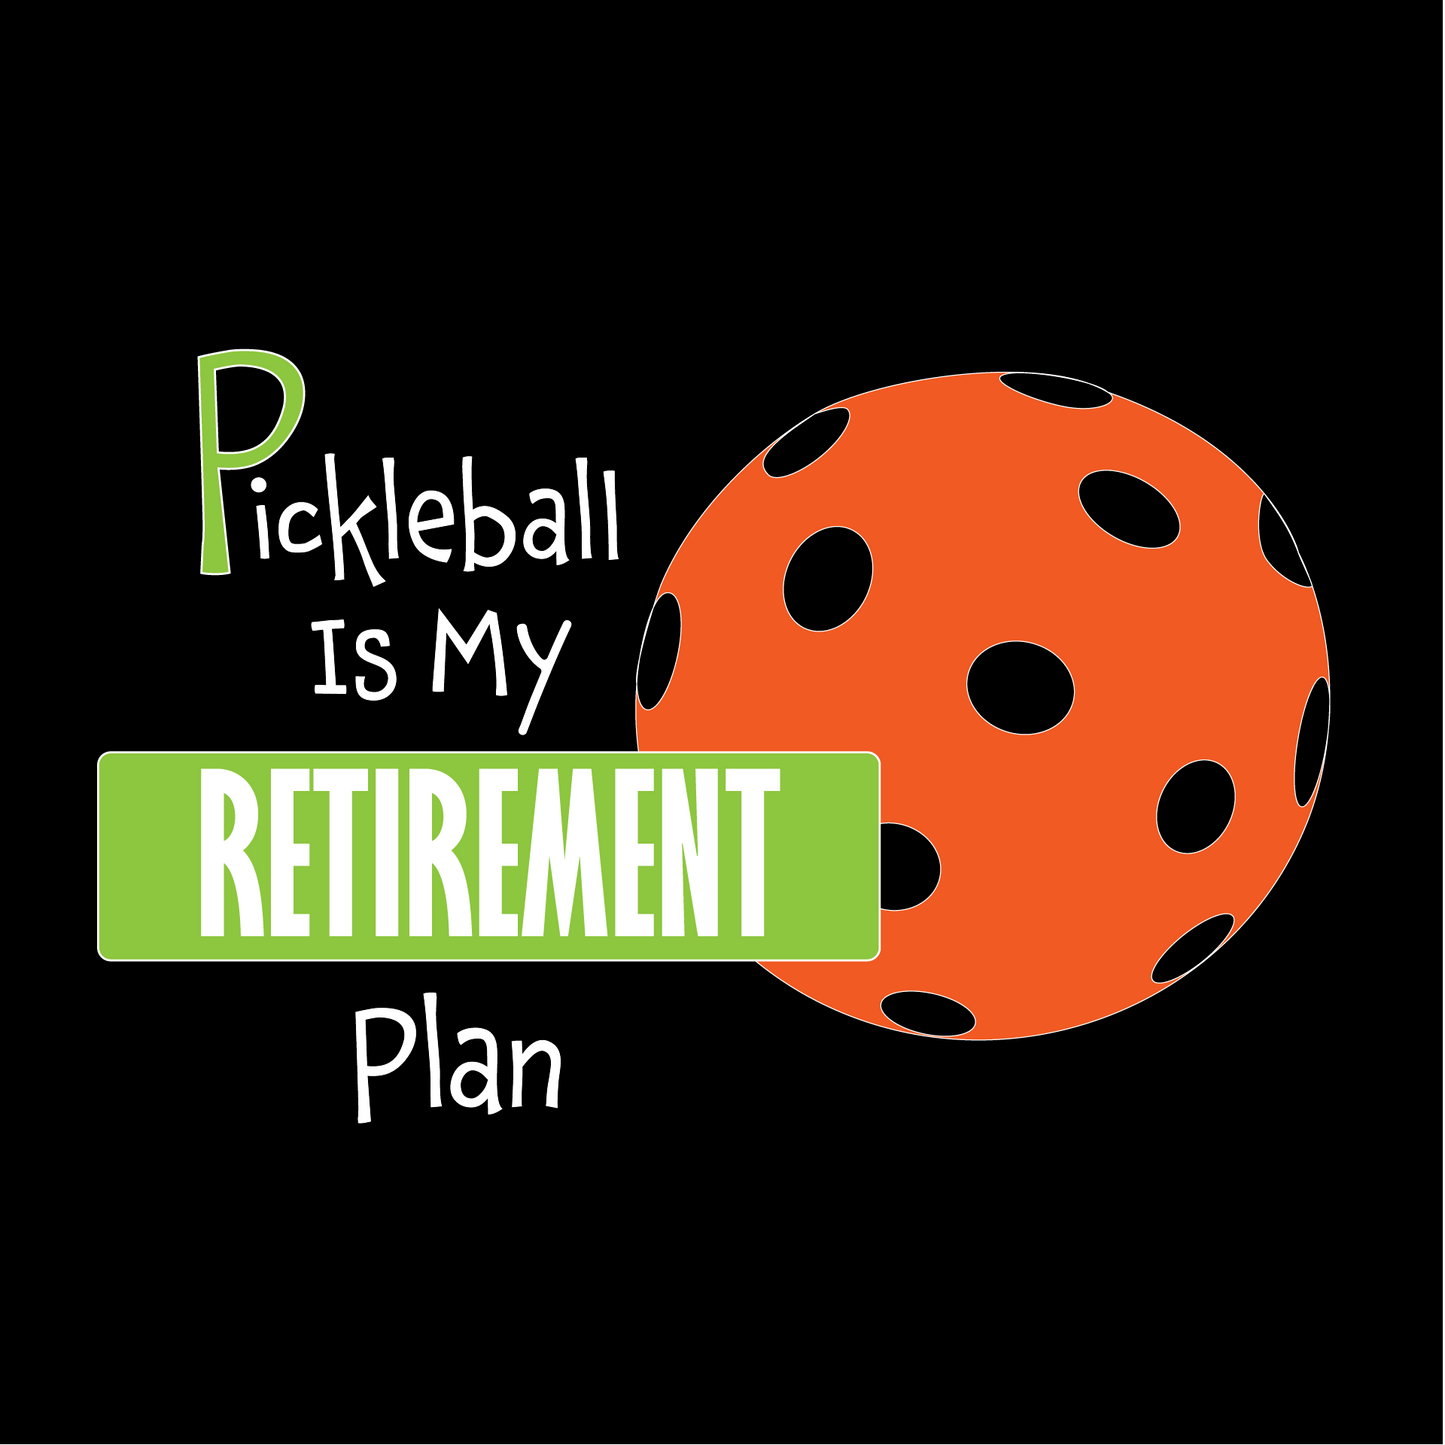 Pickleball Is My Retirement Plan | Pickleball Court Towels | Grommeted 100% Cotton Terry Velour